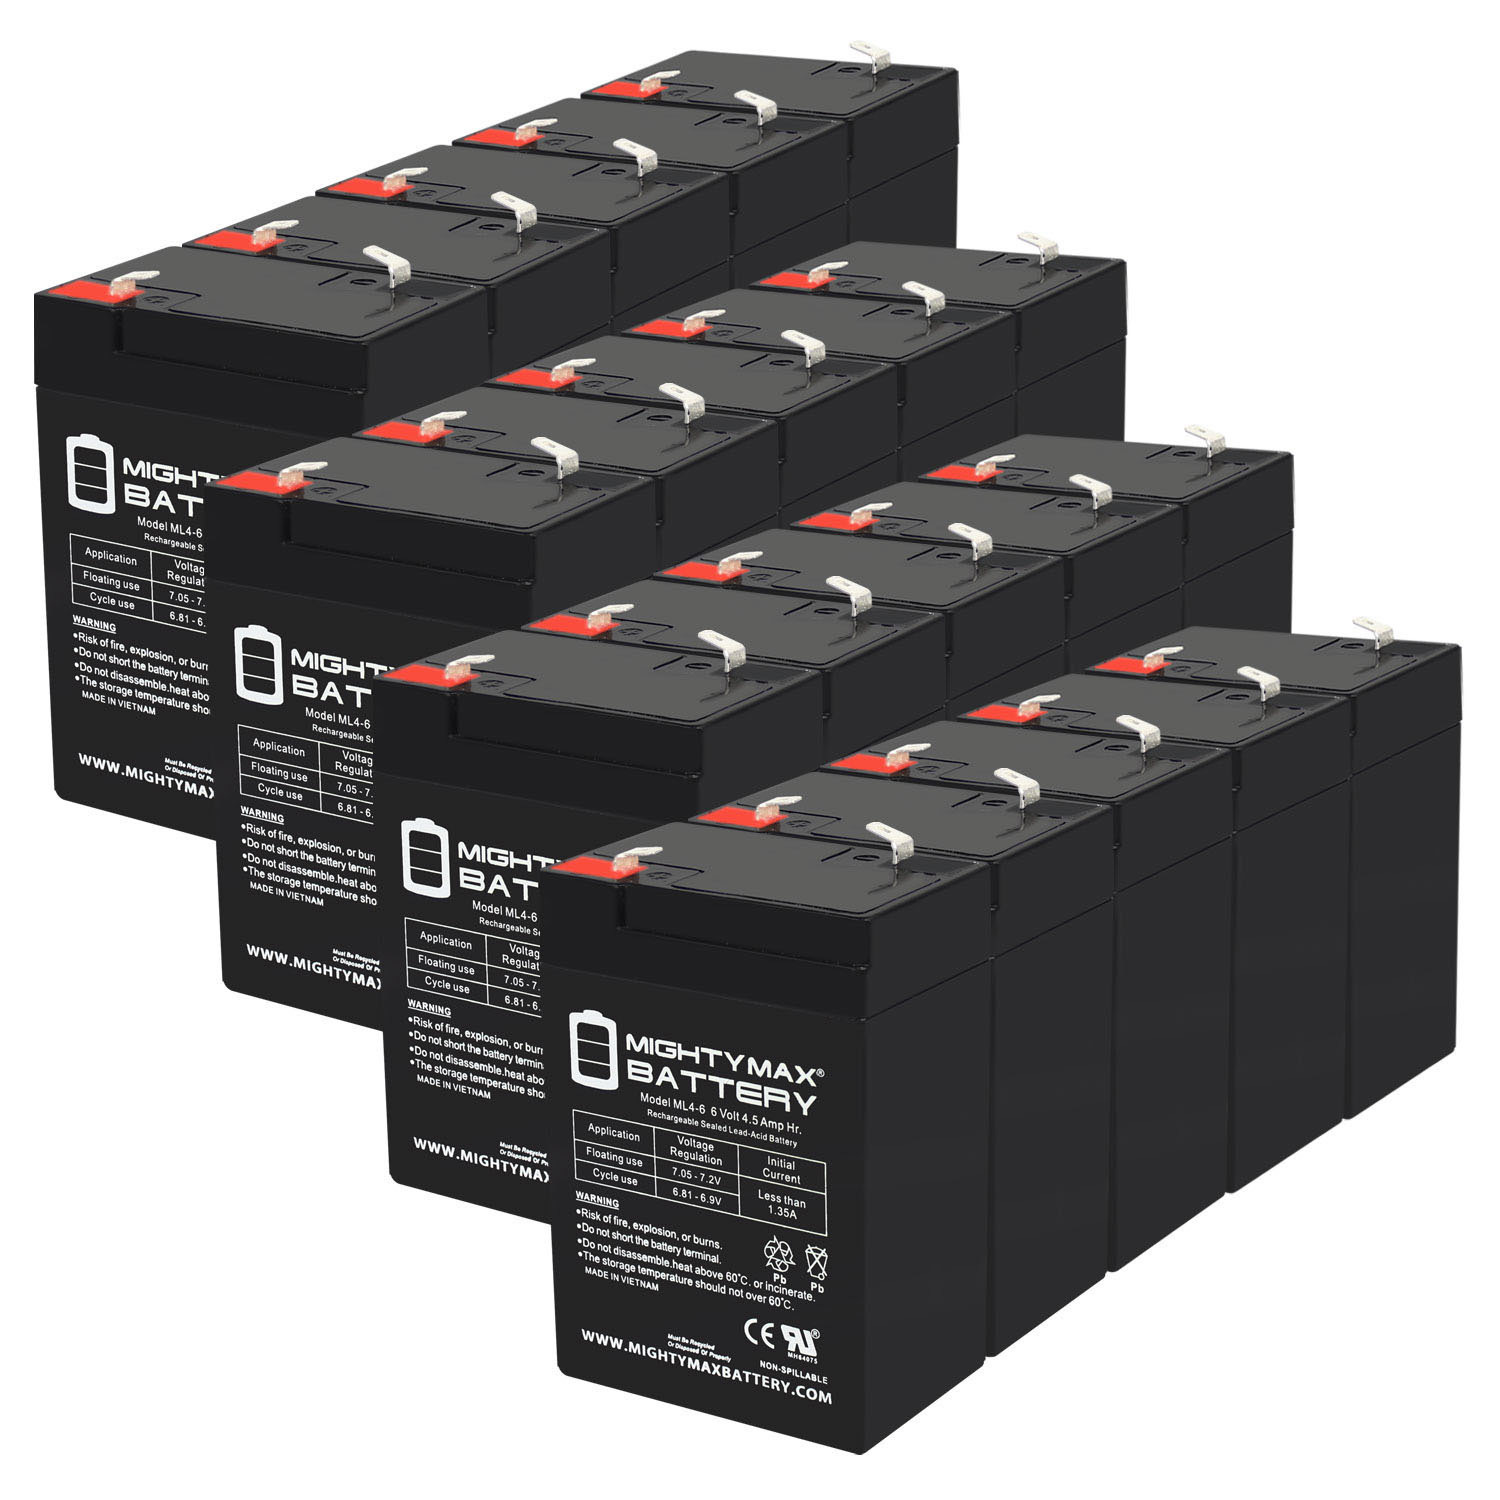 6V 4.5AH SLA Replacement Battery for Dual-Lite CVT3GWI Lighting - 20 Pack